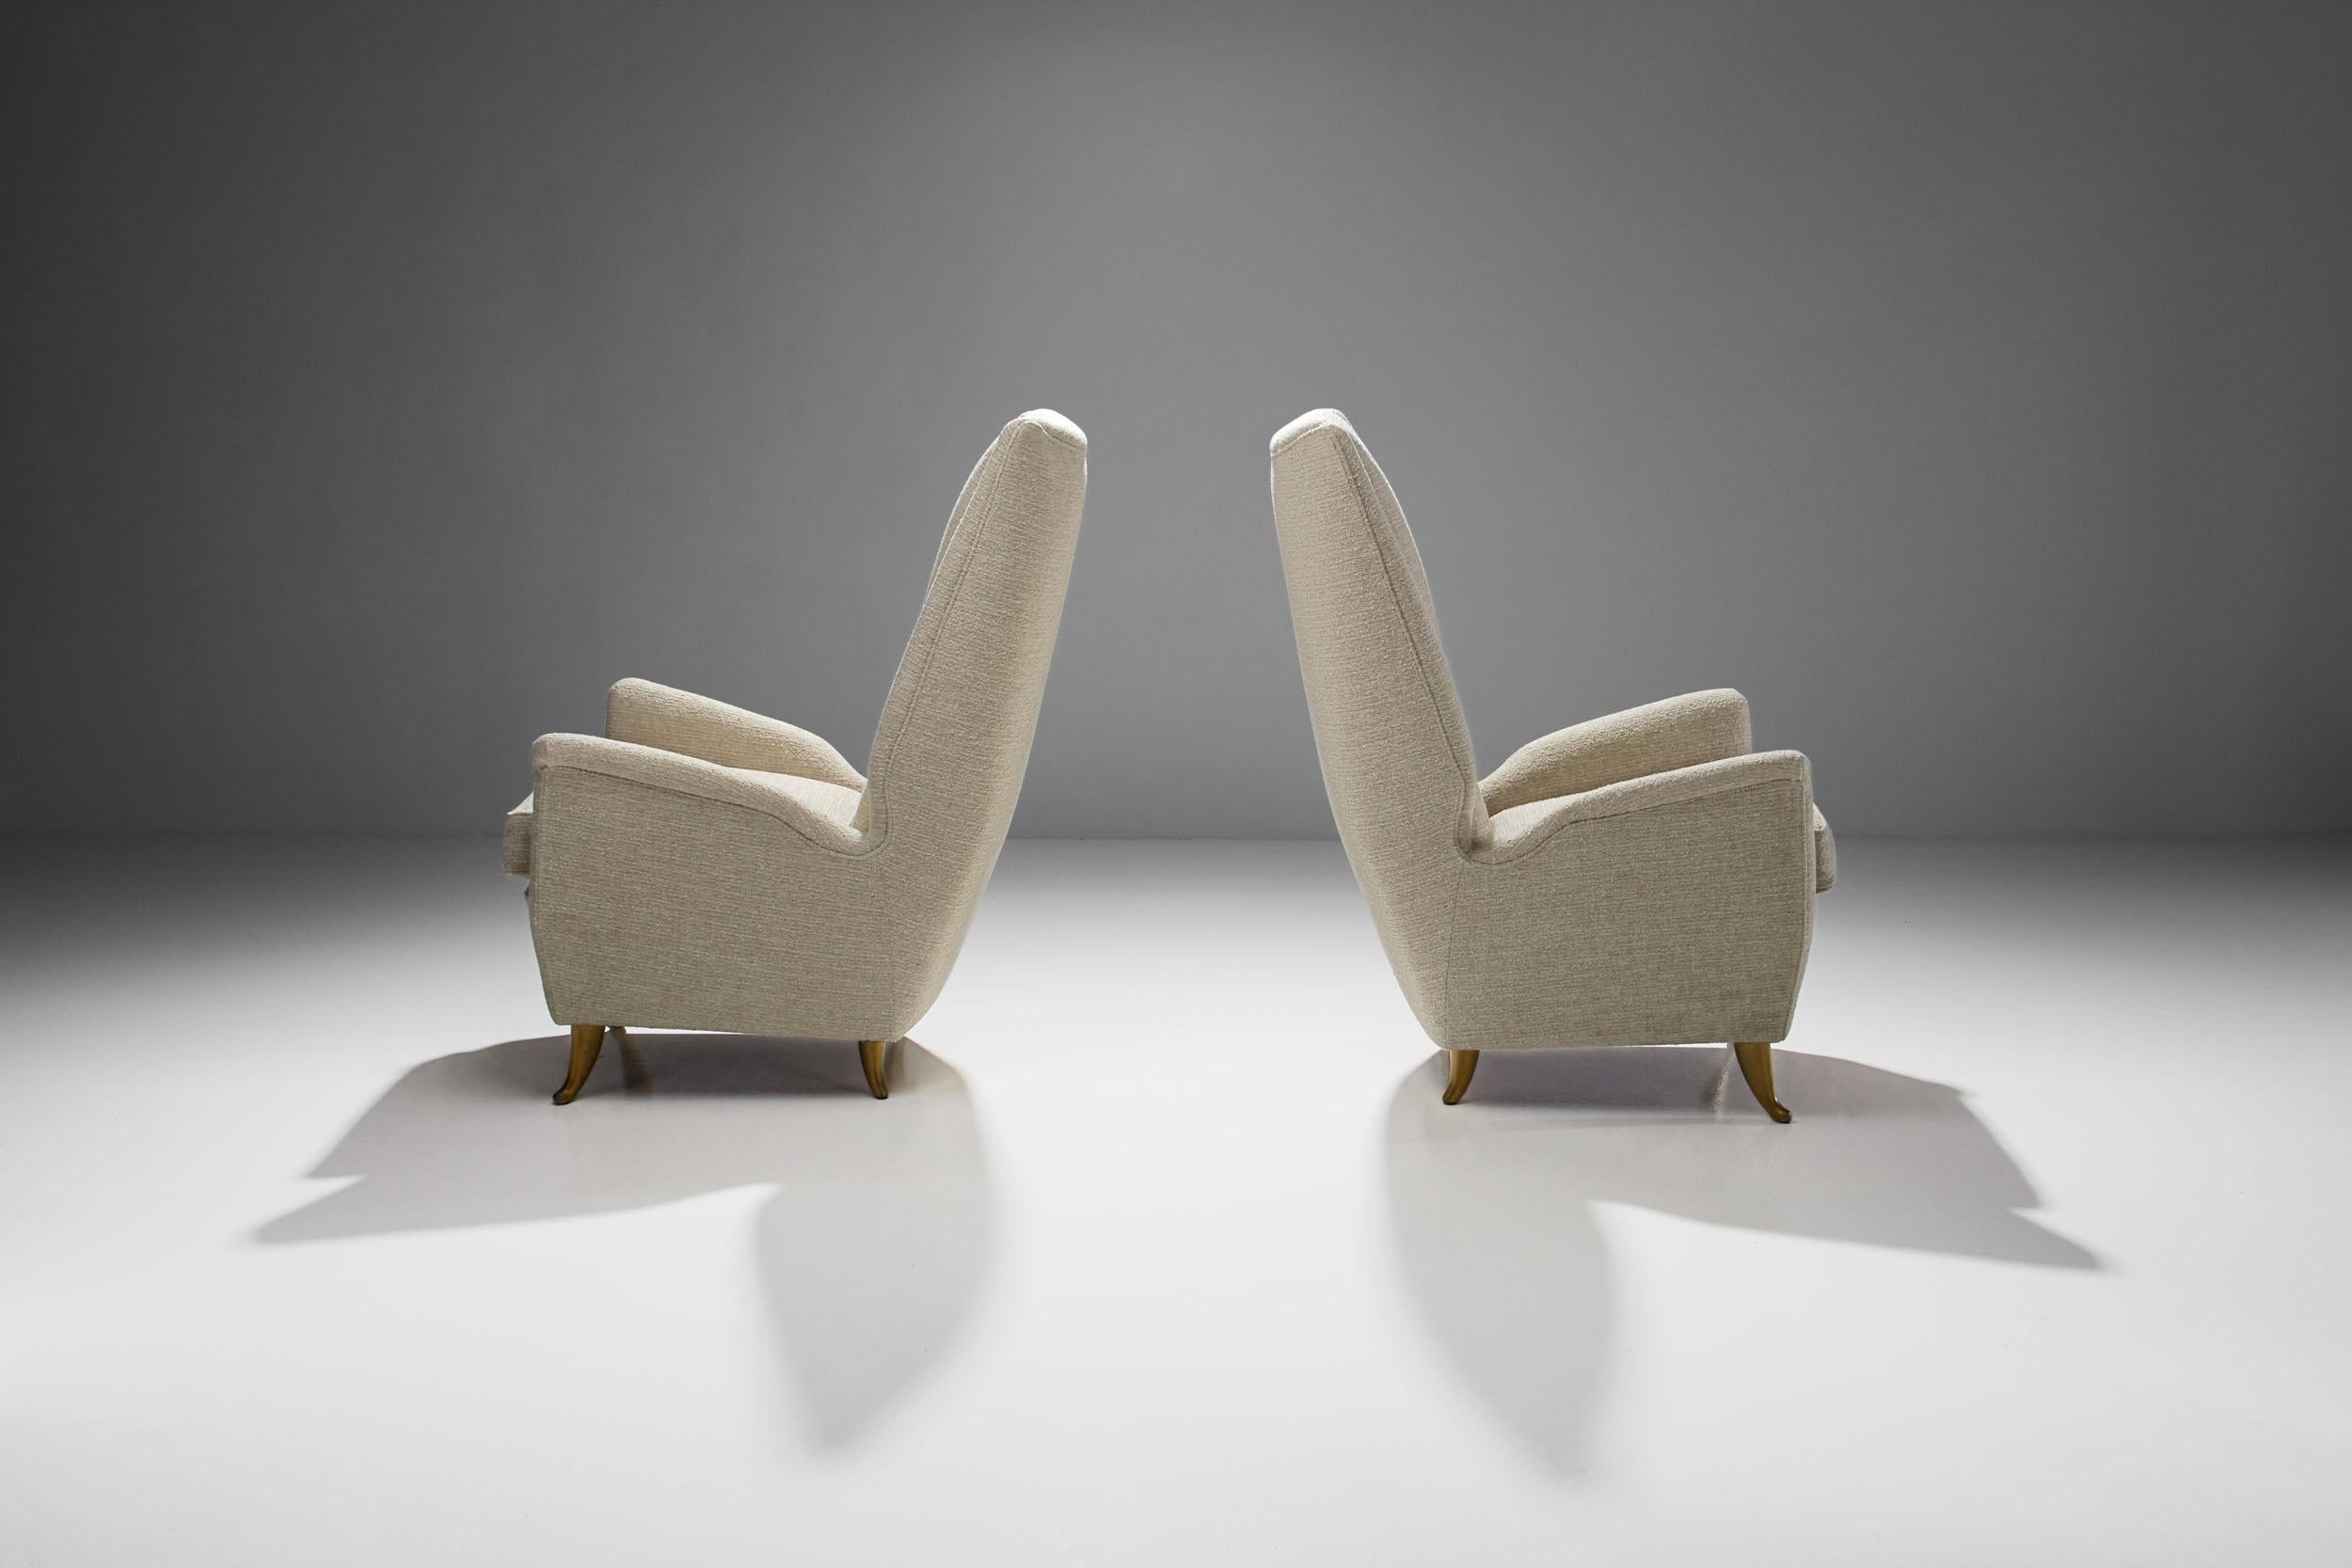 Italian Pair of Lounge Chairs Attributed to Gio Ponti for ISA Bergamo, Italy 1950s For Sale